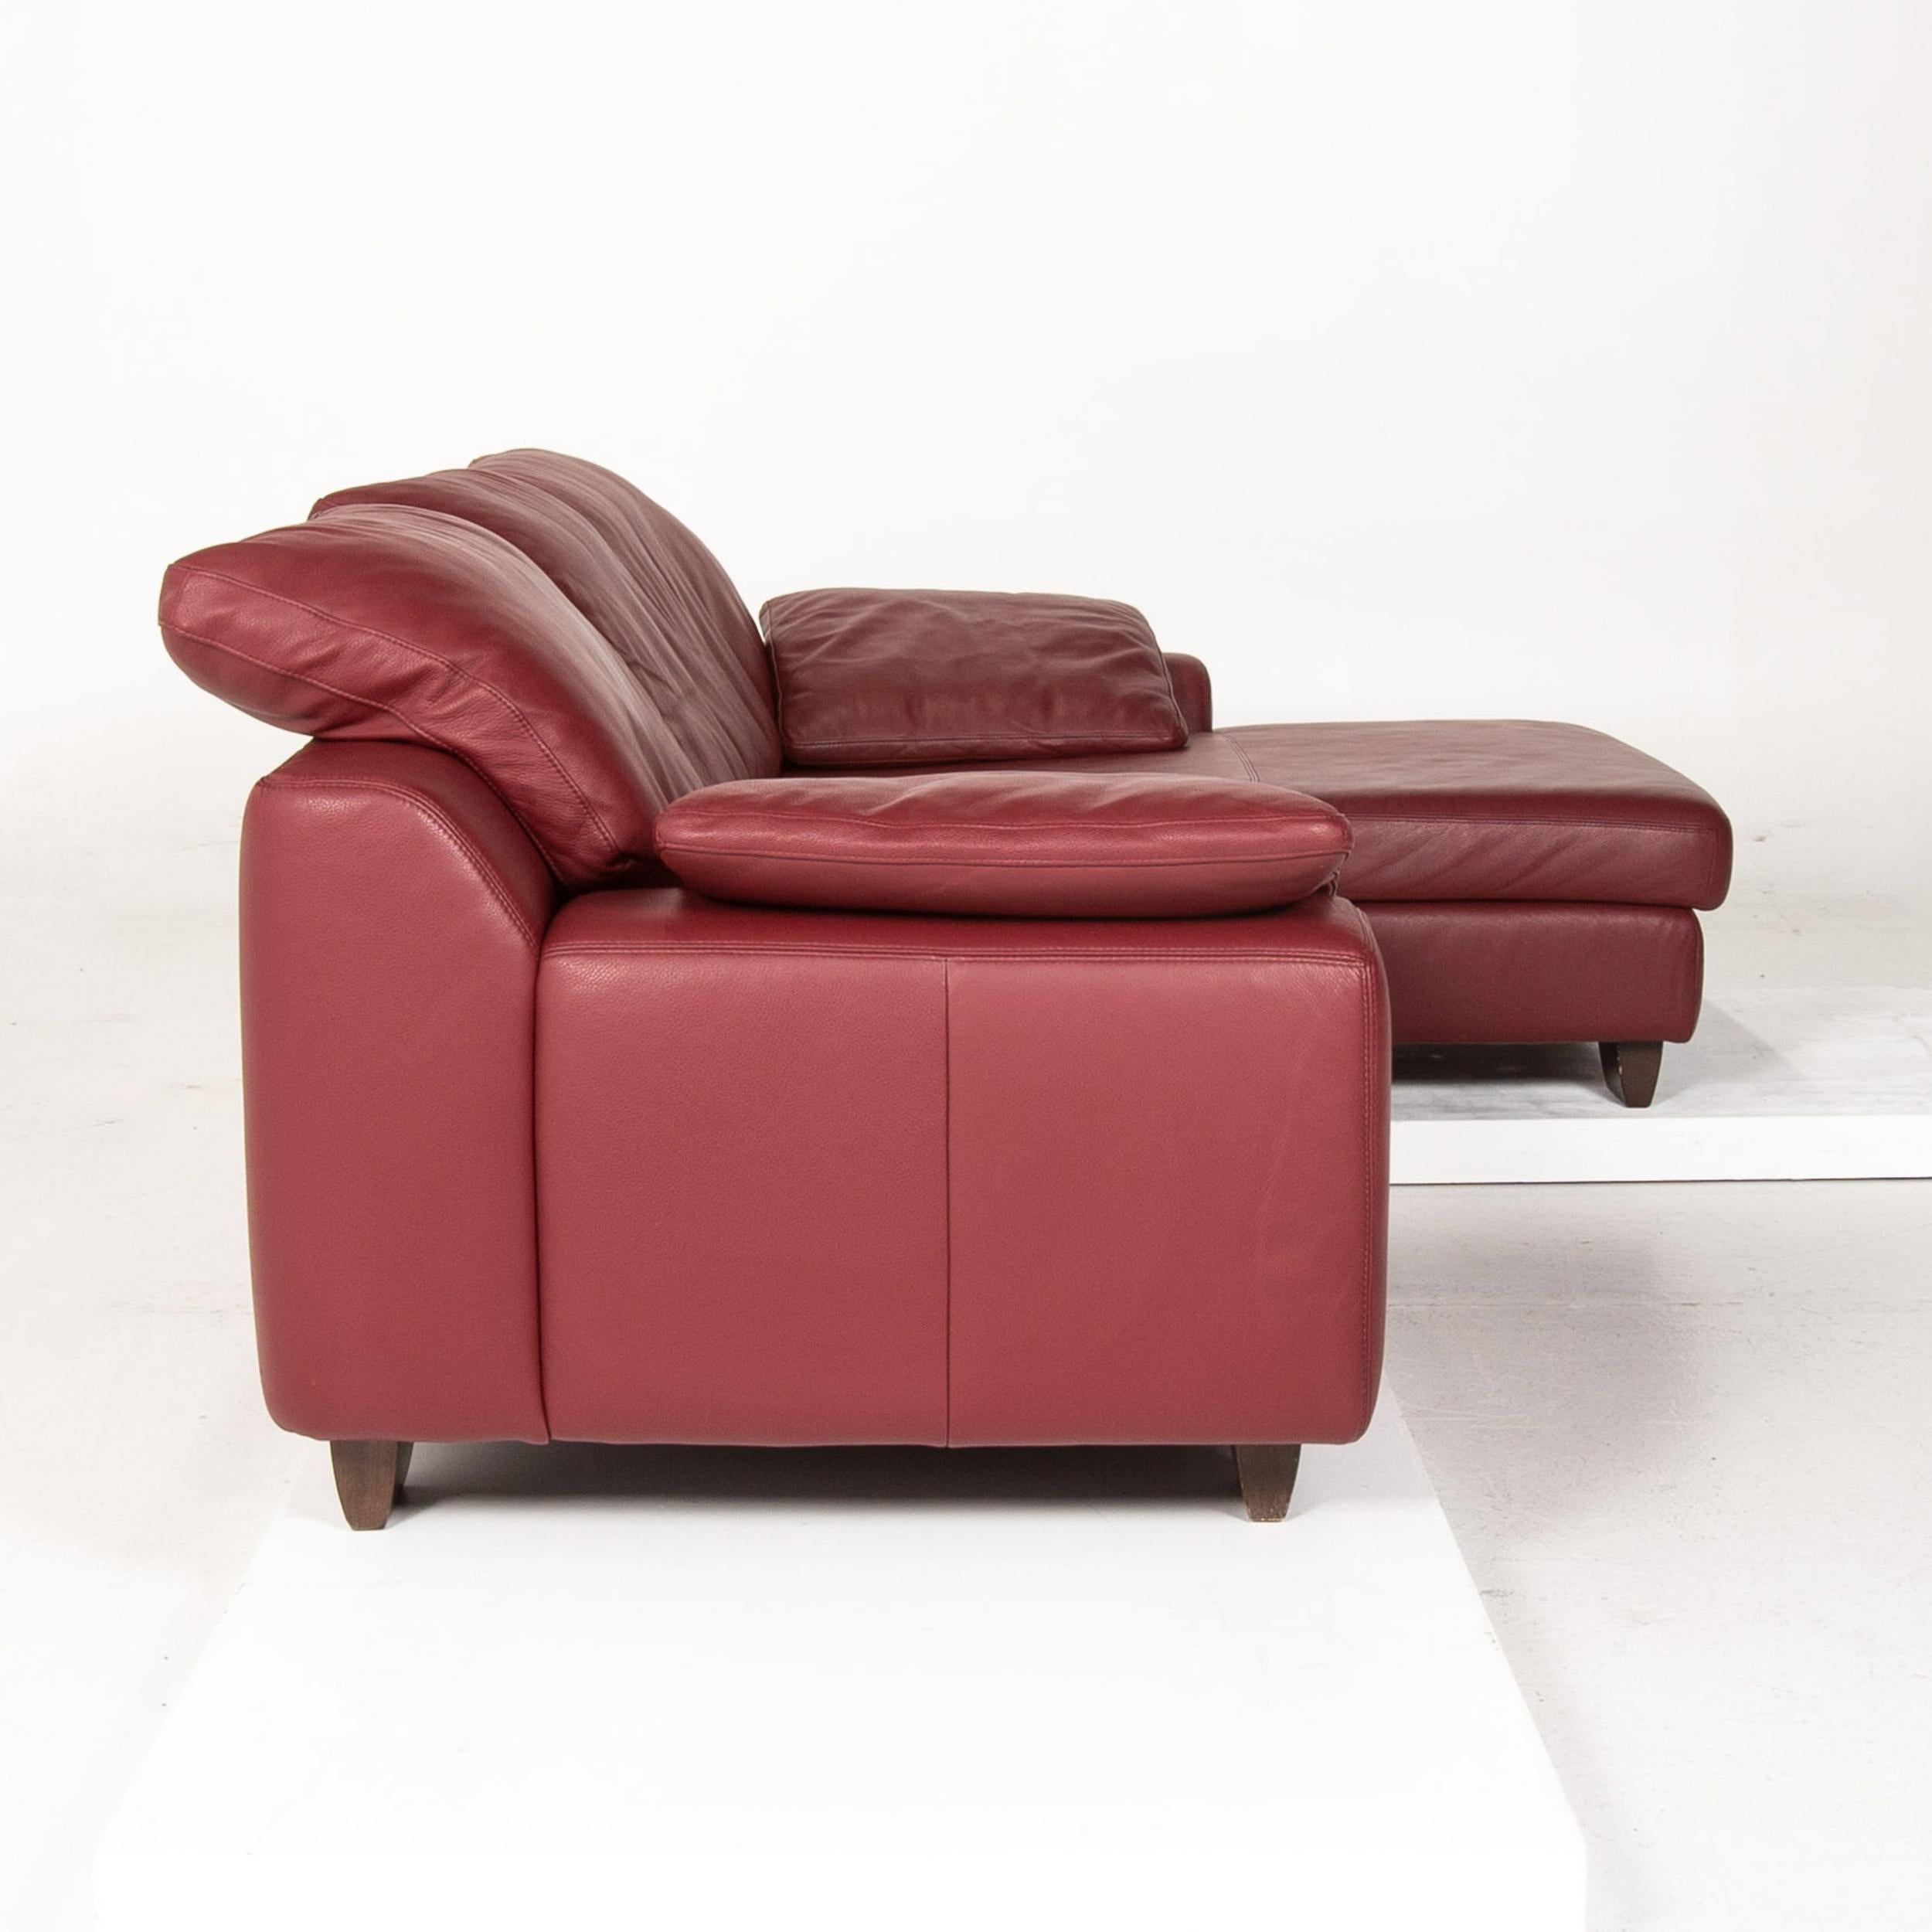 Musterring Leather Corner Sofa Red Dark Red Sofa Couch For Sale 2